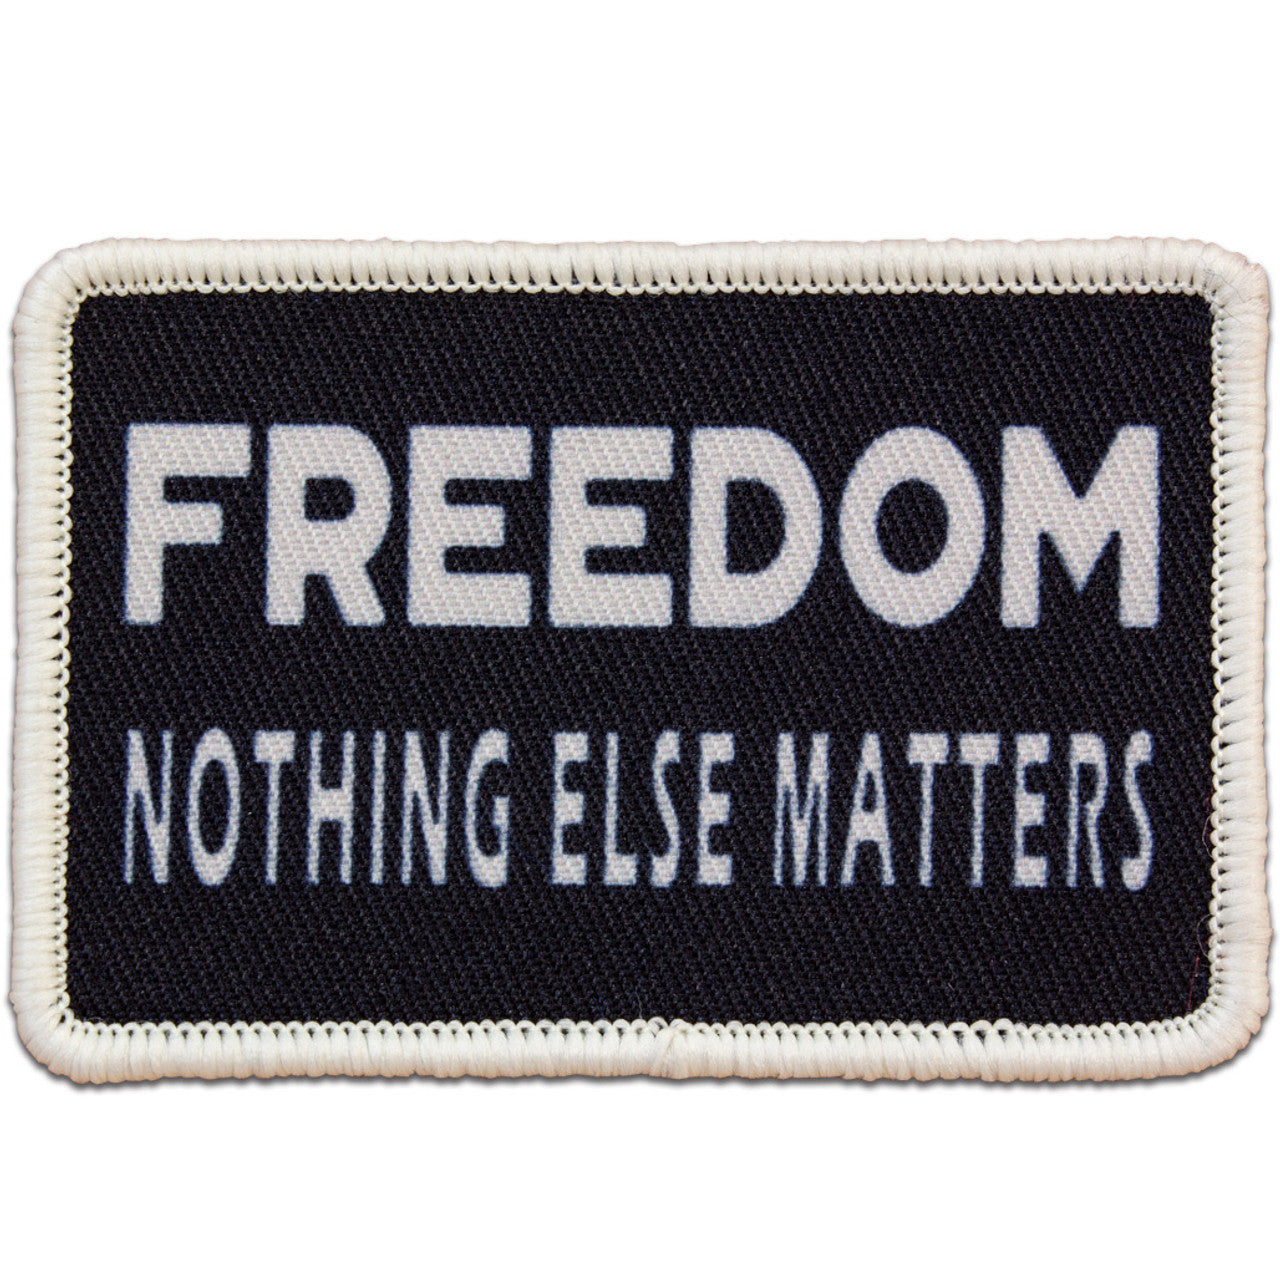 "FREEDOM NOTHING ELSE MATTERS" MORALE PATCH